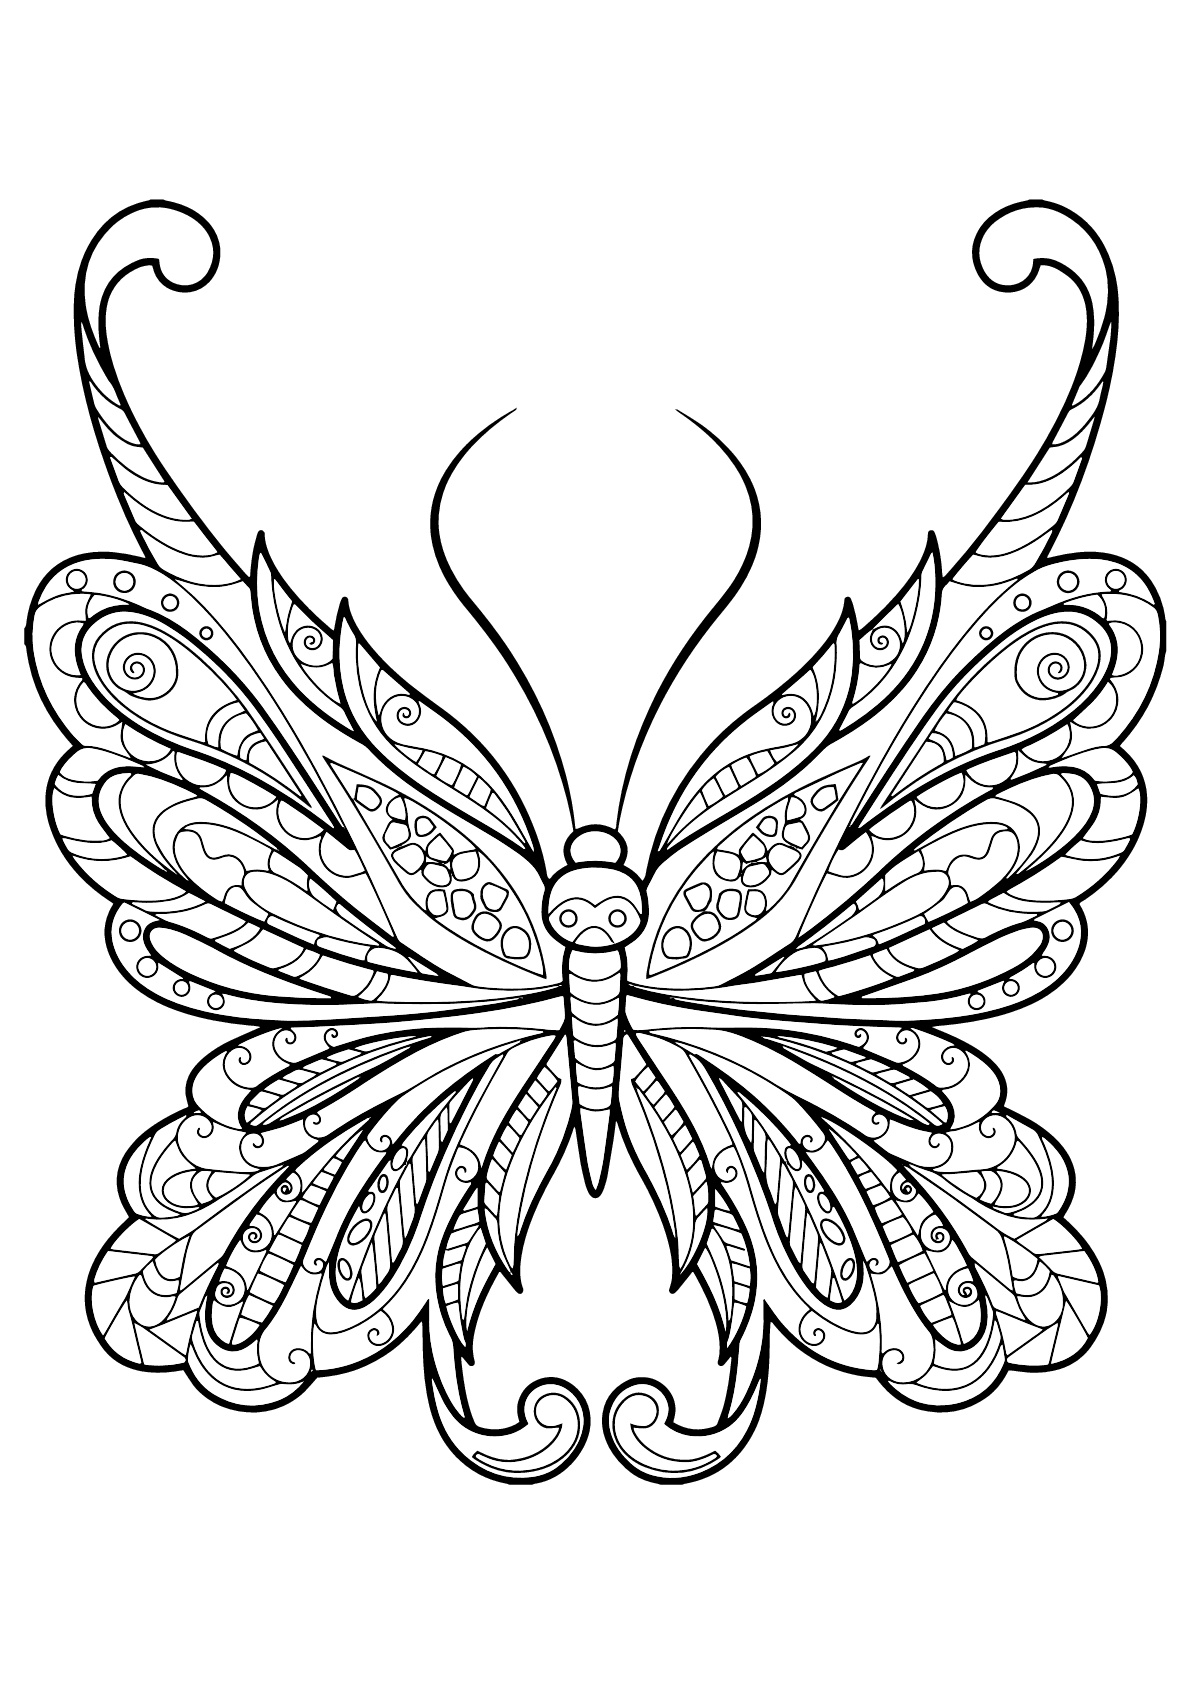 Incredible butterfly with simple motifs